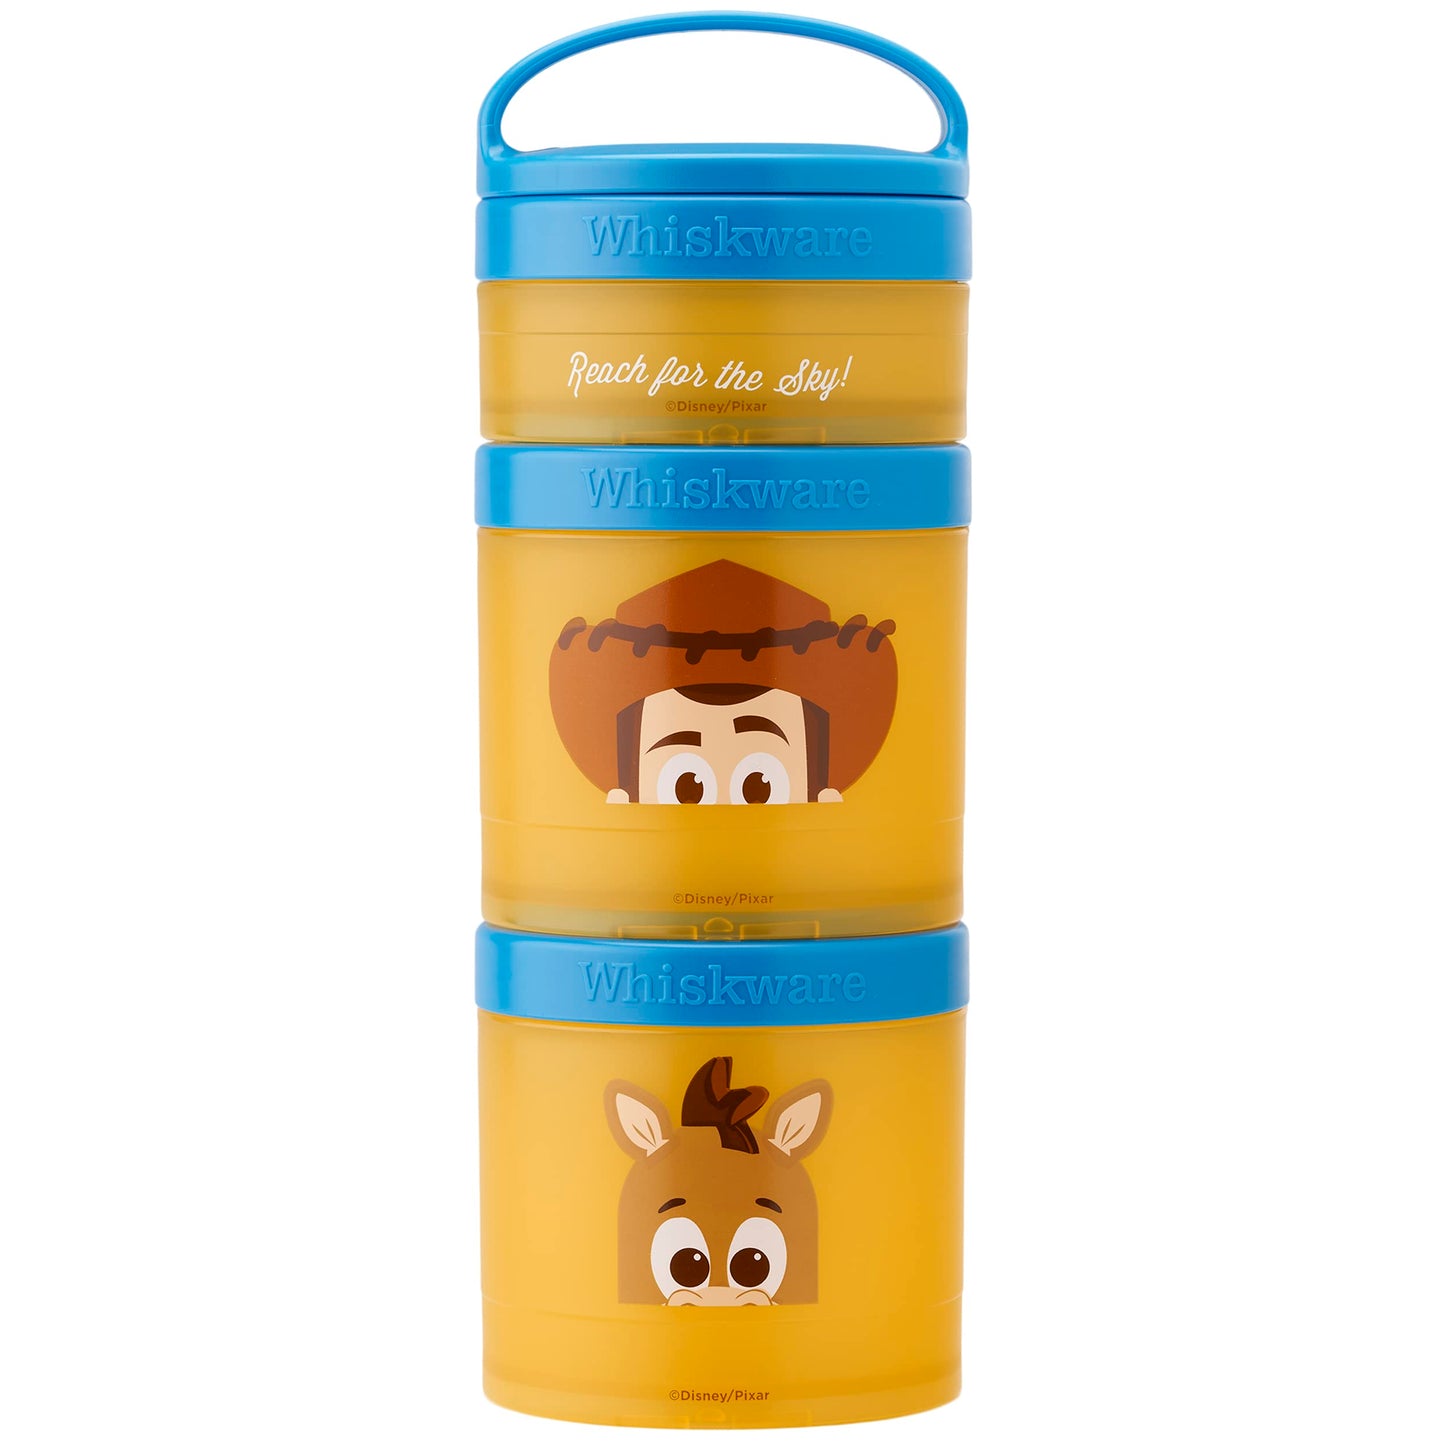 Whiskware Disney Pixar Stackable Snack Containers for Kids and Toddlers, 3 Stackable Snack Cups for School and Travel, Finding Nemo with Nemo and Dory